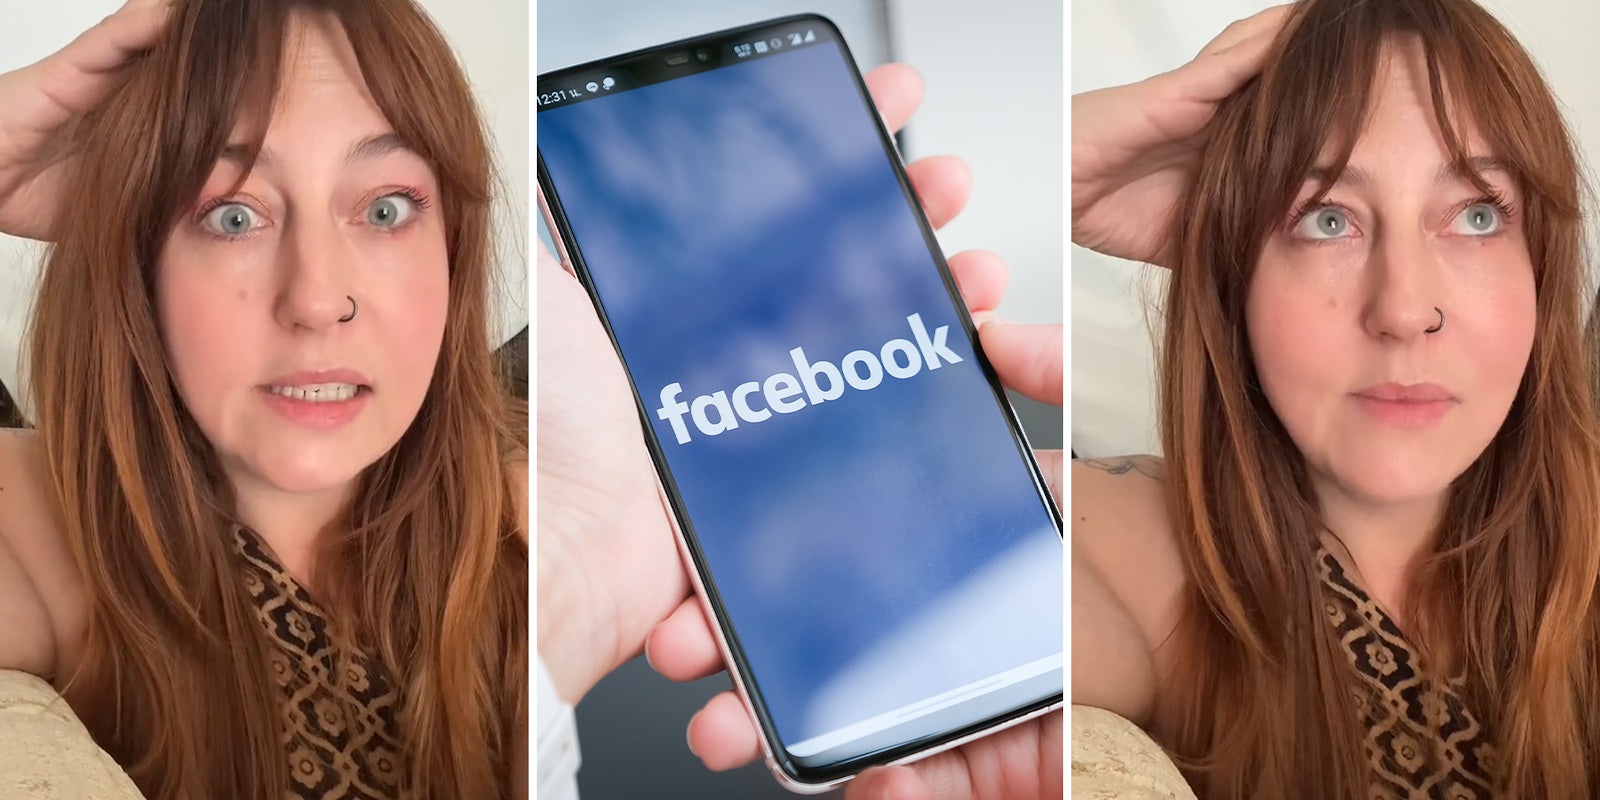 Facebook marketplace customer says seller tried to lure her into his basement